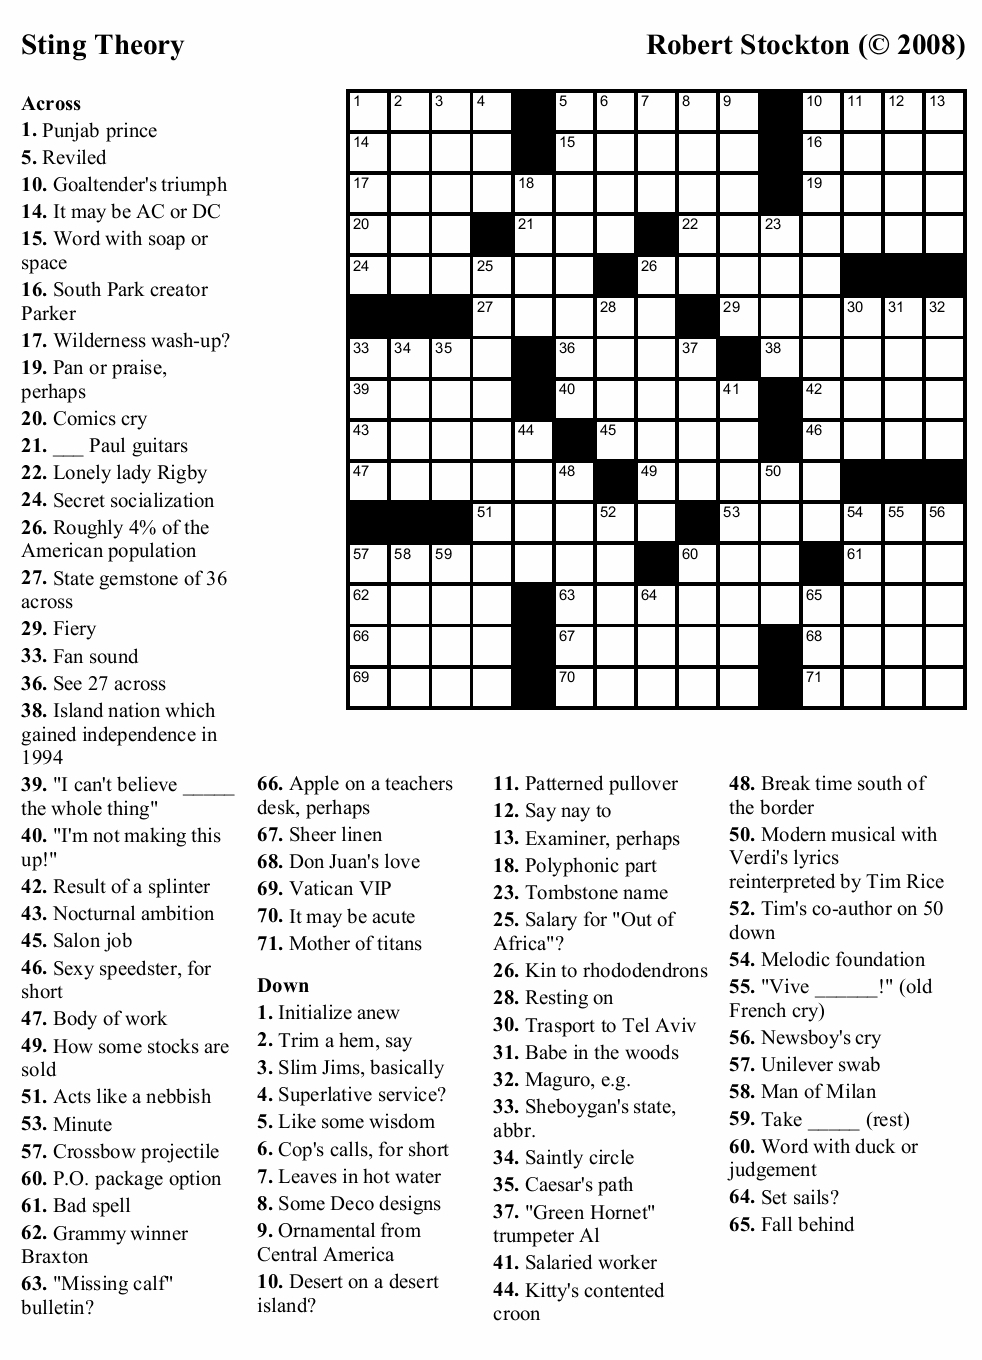 NEW YORK TIMES SUNDAY CROSSWORD BOOK WISE BLOOD THE CROSSWORD THE NEW 